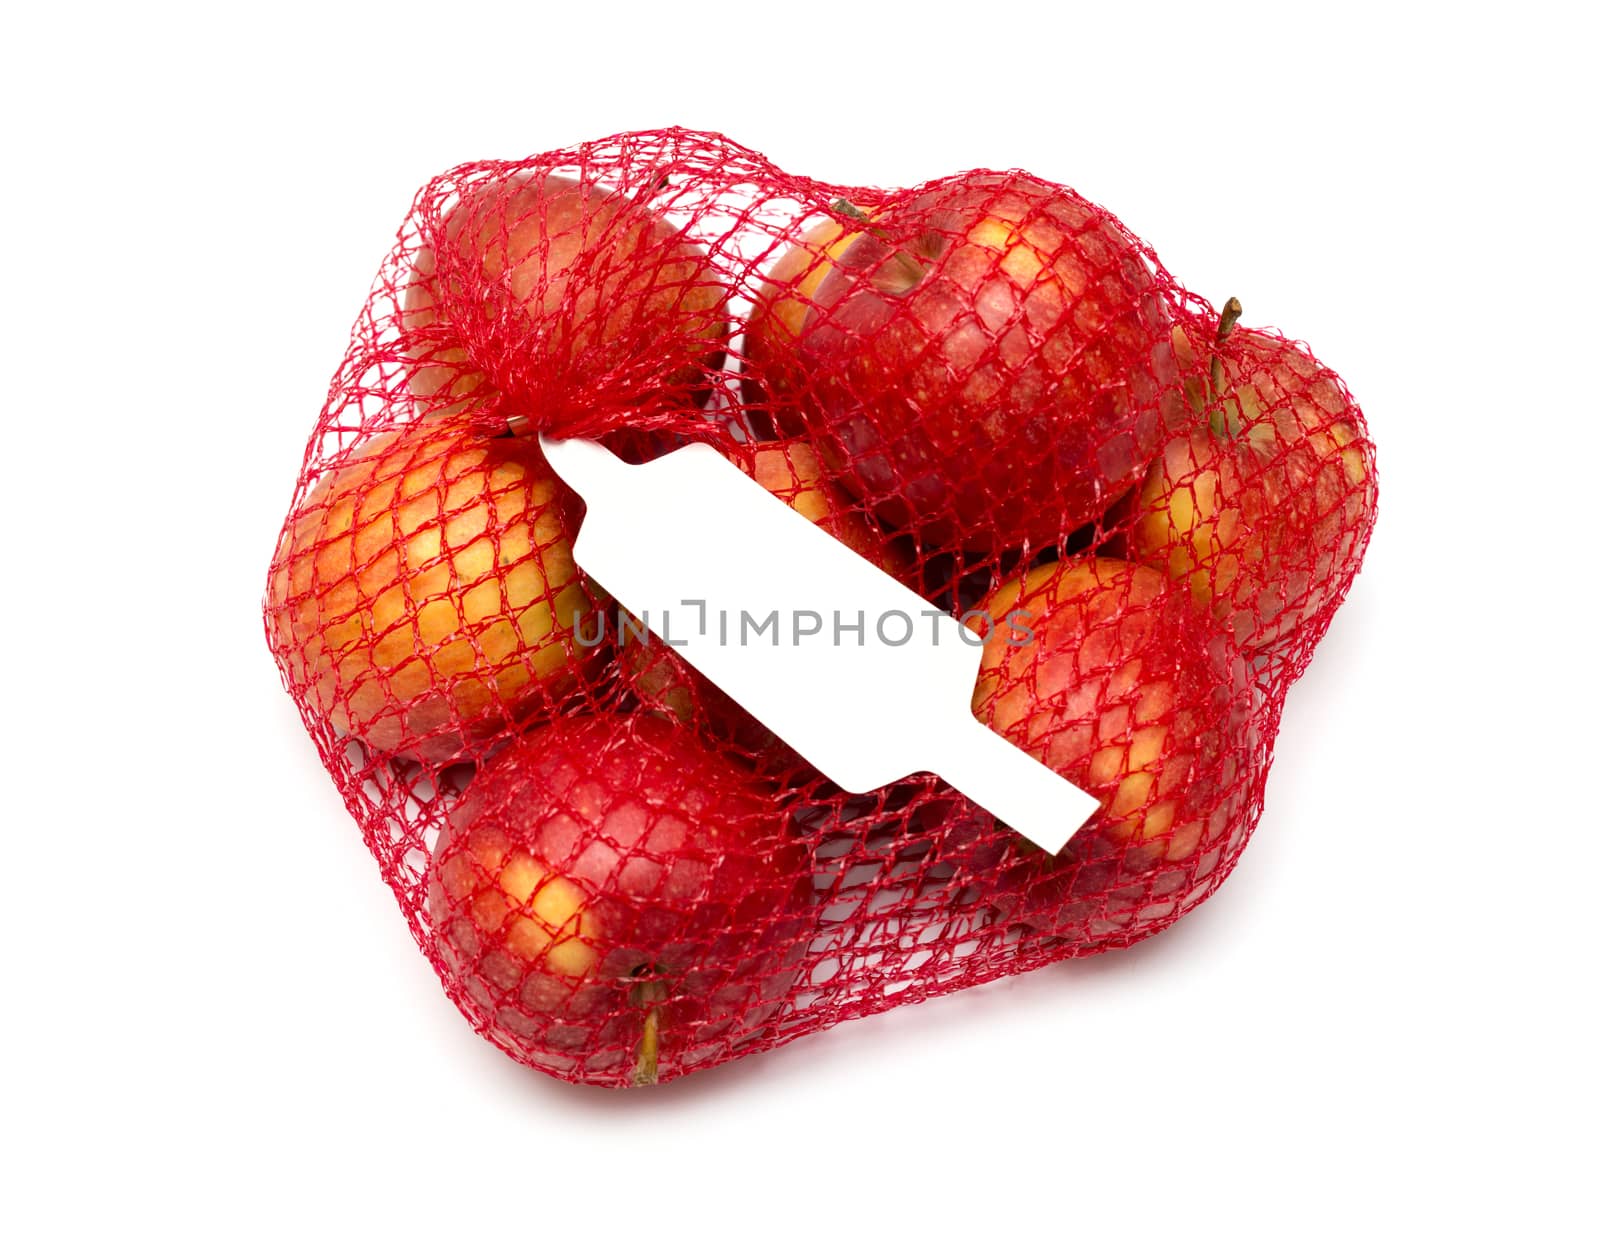 The heap of apples packaged in the red net by DNKSTUDIO